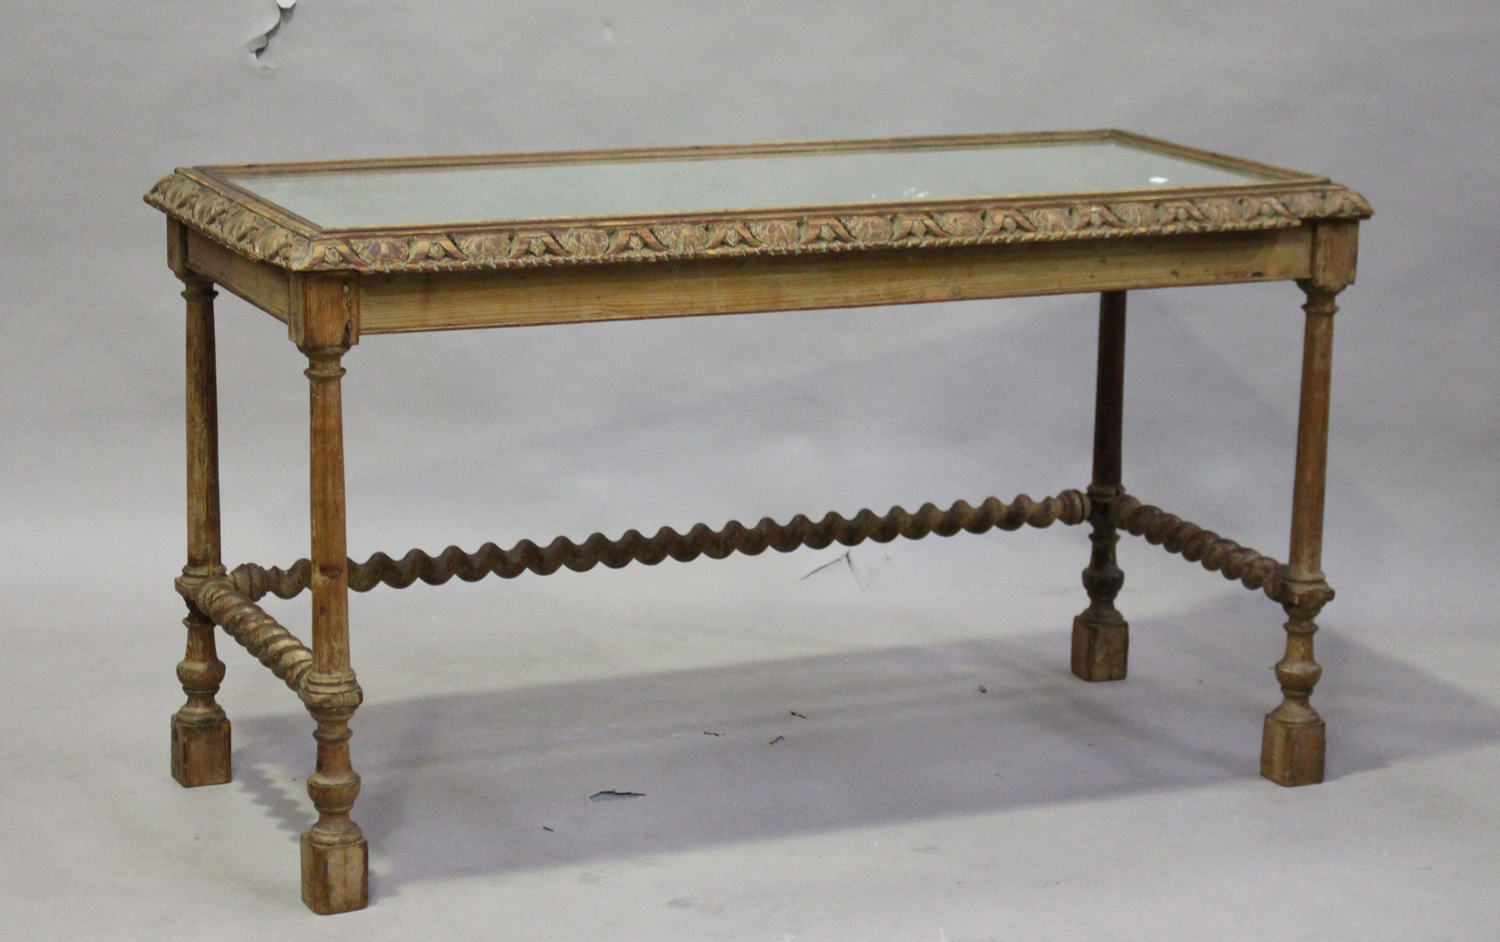 A late 19th century pitch pine rectangular hall table, the top inset with a mirror panel within an